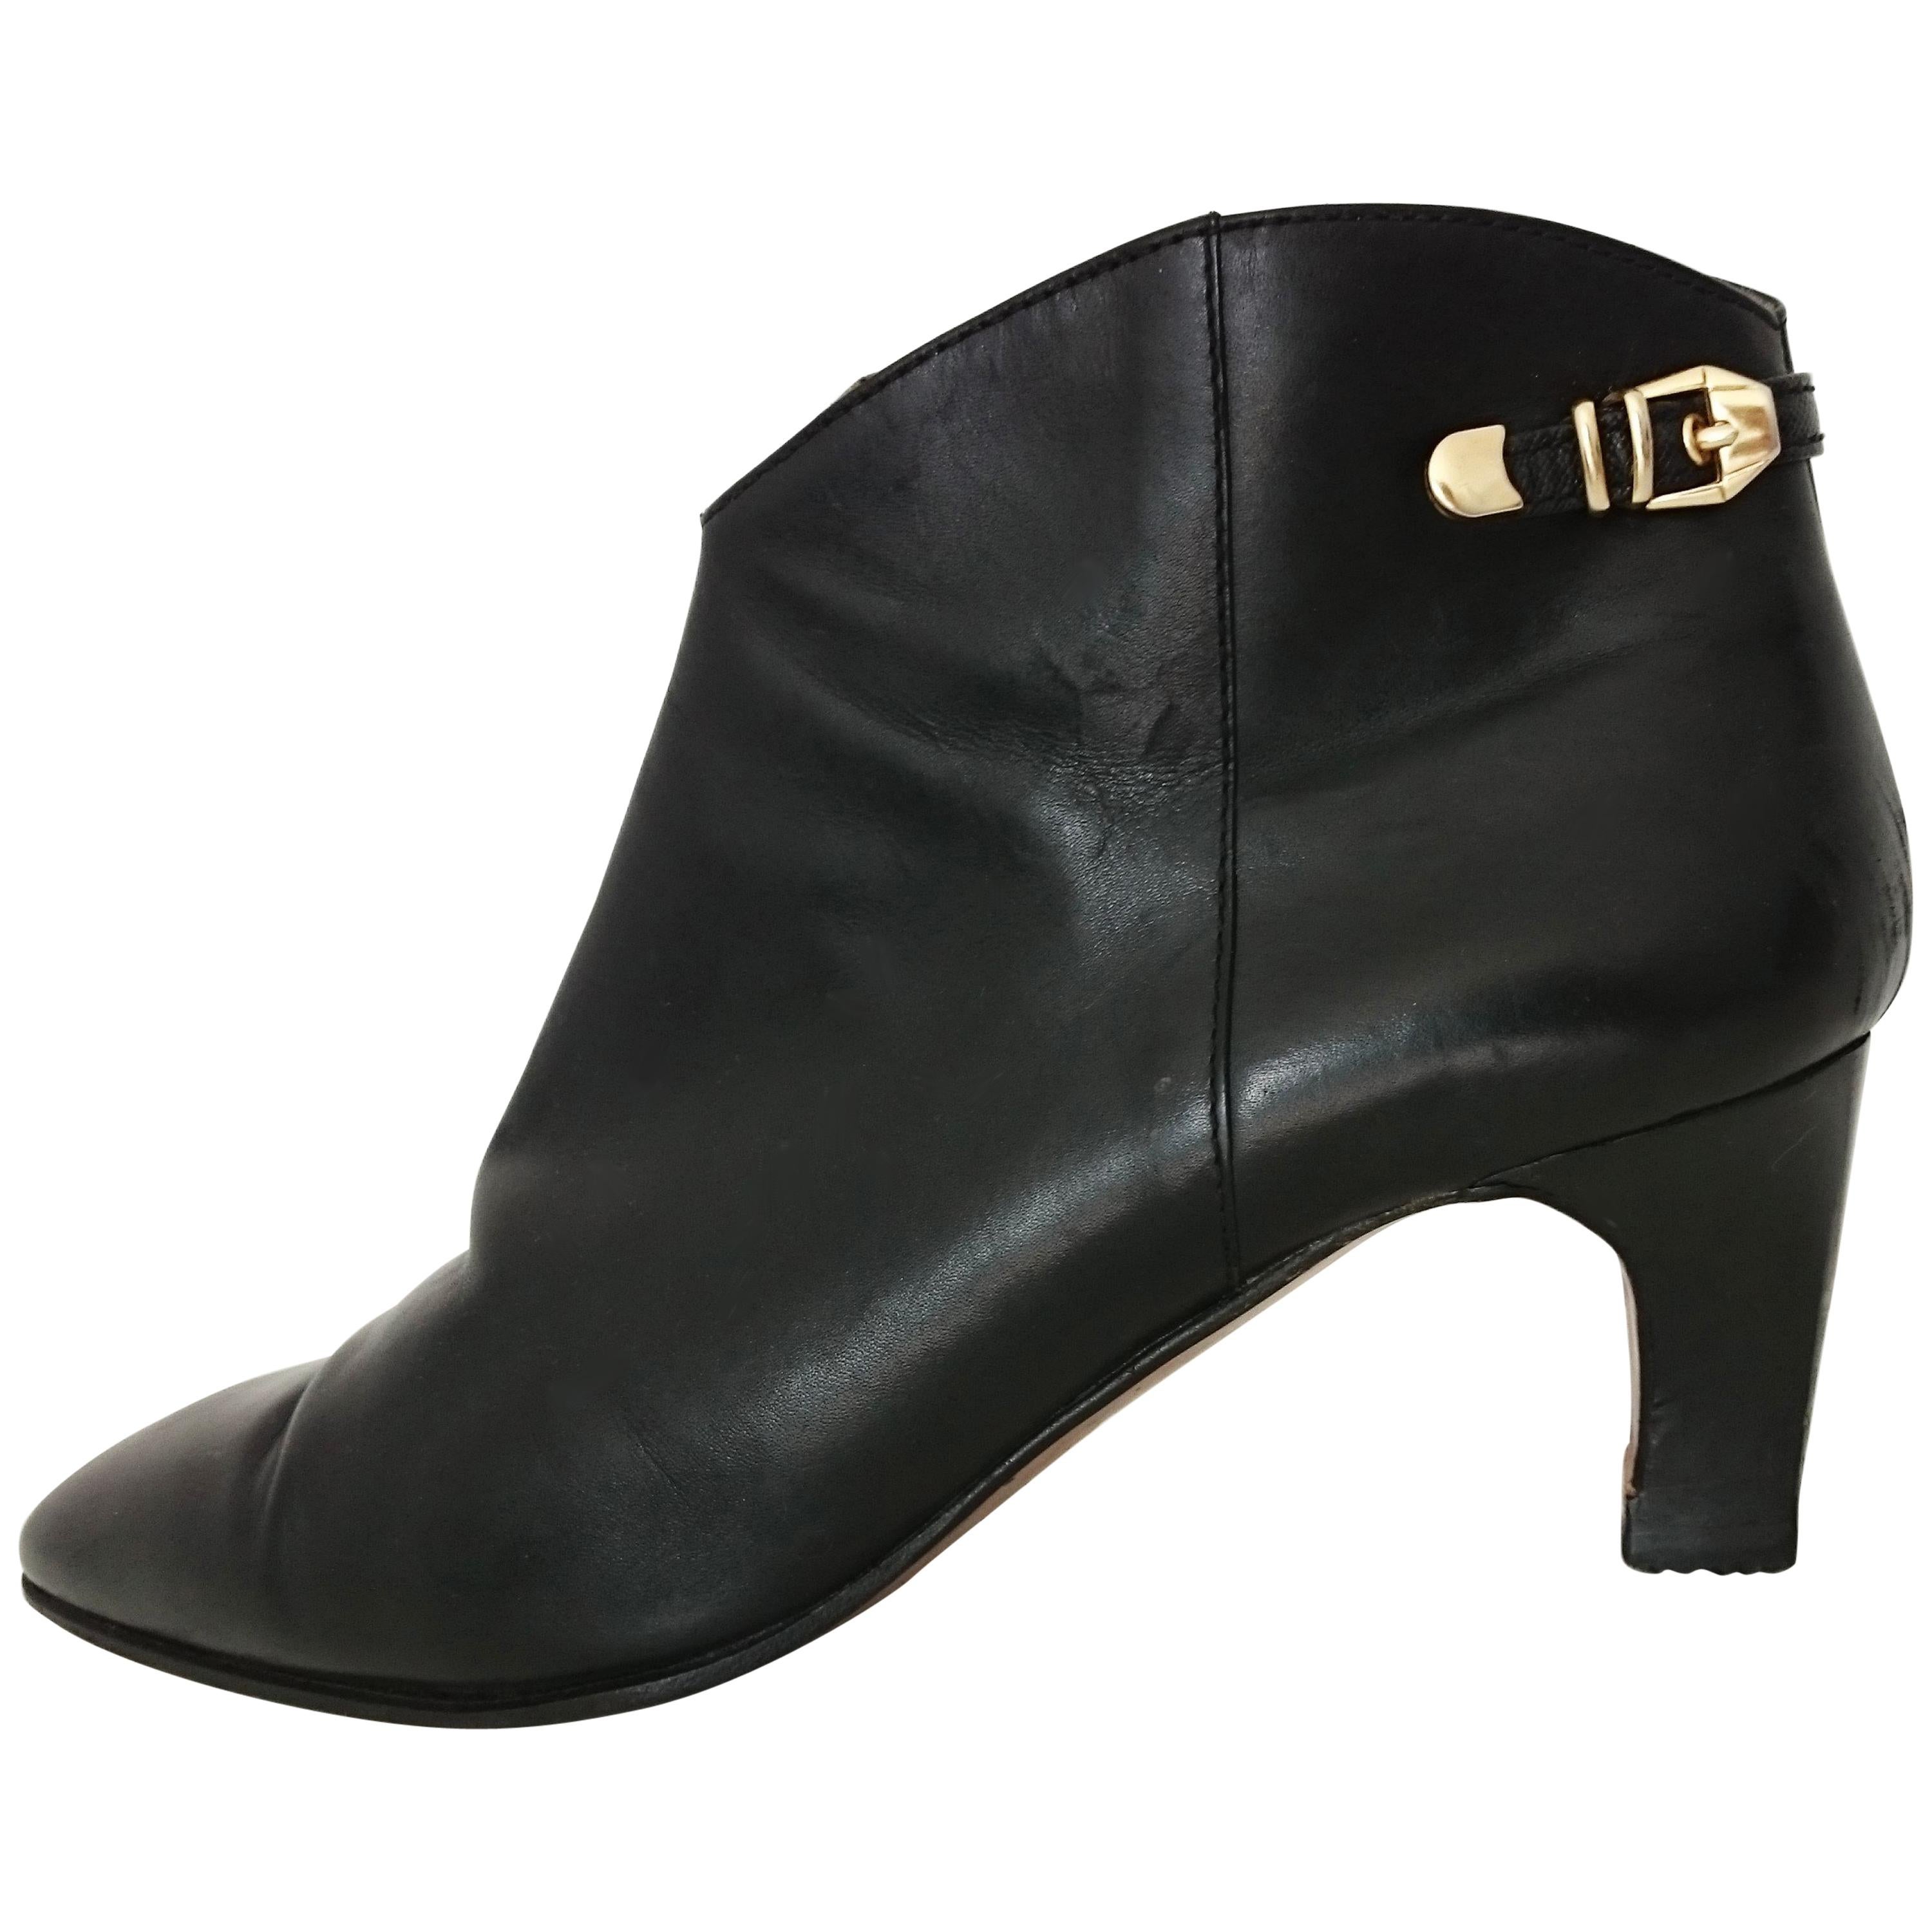 Sergio Rossi Ankle Boots Black Leather with Zipper. Great conditions. Size 40 For Sale